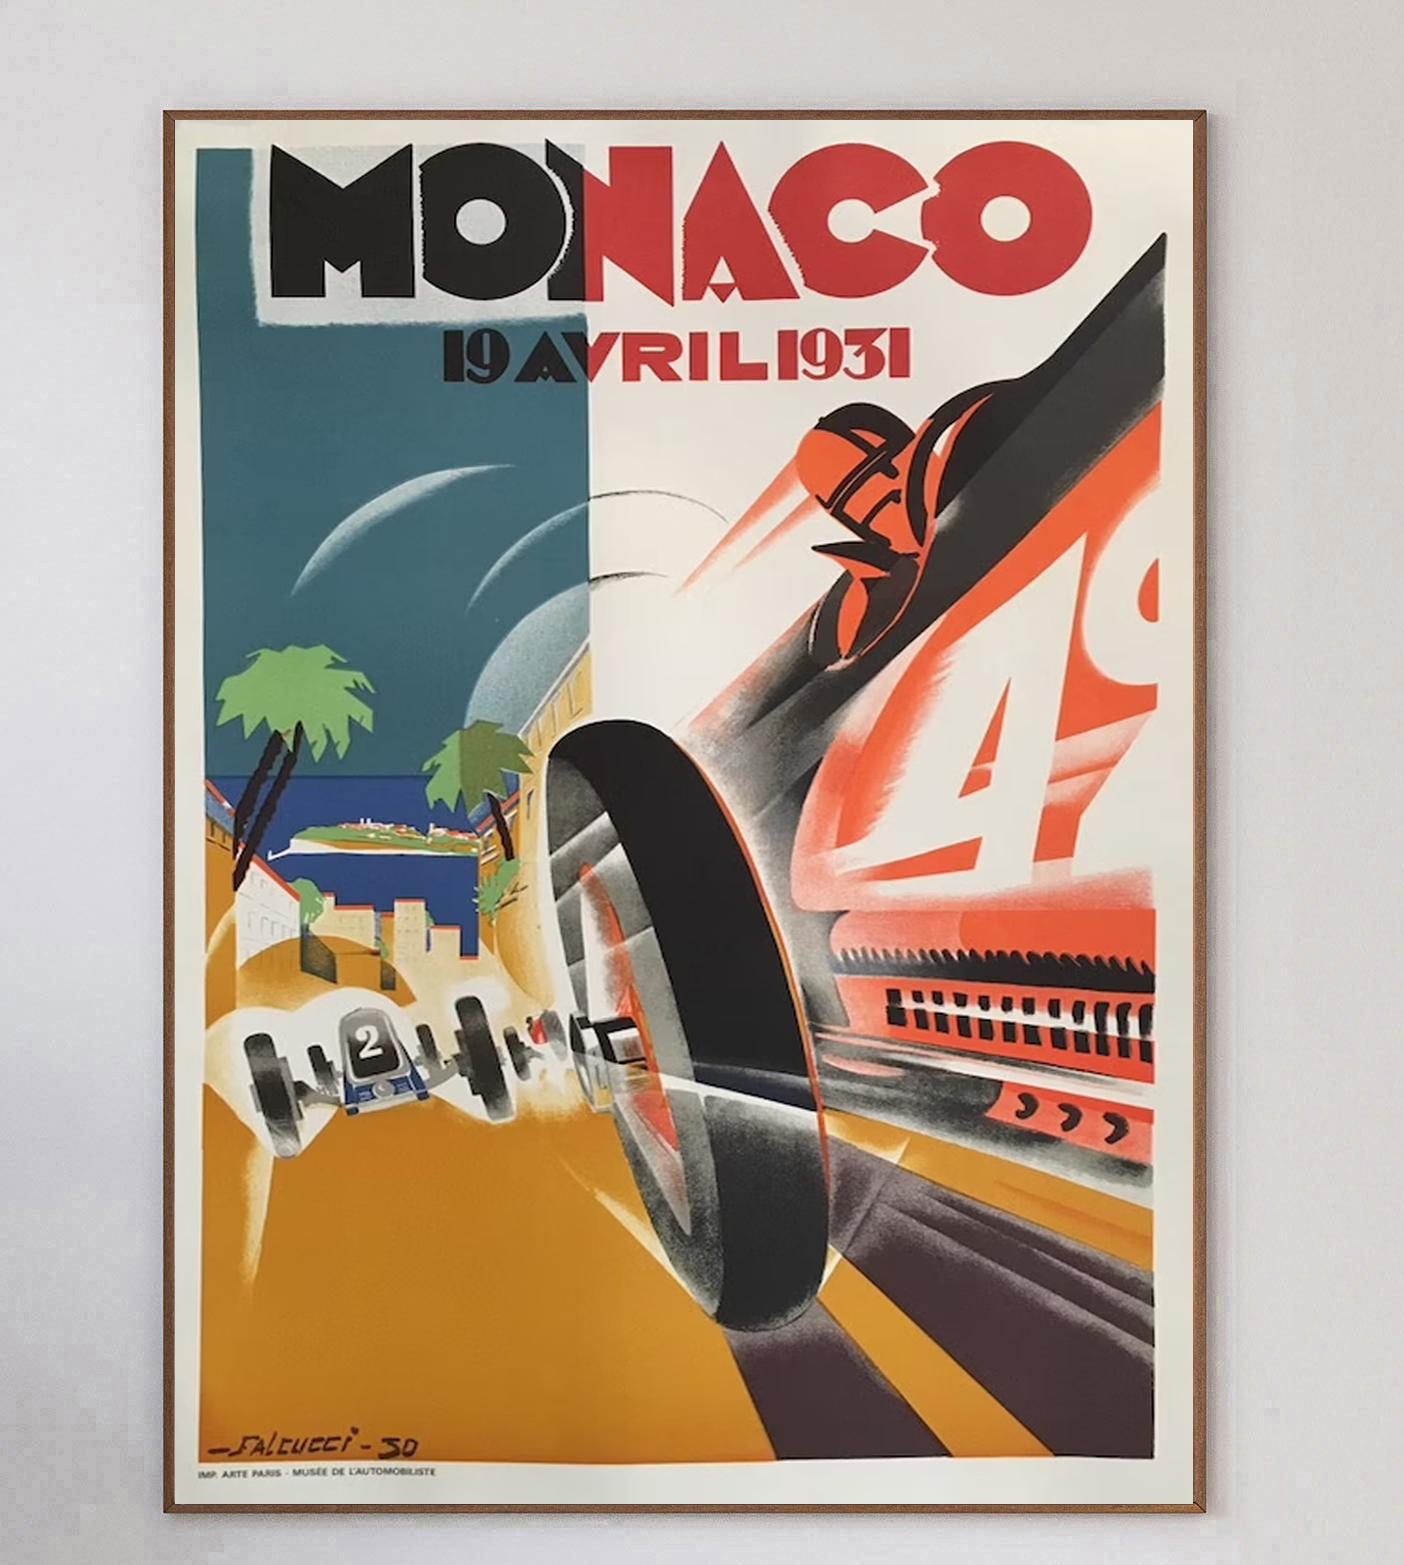 This poster is for the 1931 Monaco Grand Prix, with the brilliant illustration design by artist Robert Falcucci. The image depicts a speeding red car evading a white car in vivid colour in wonderful art deco style. The race was won by Bugatti with